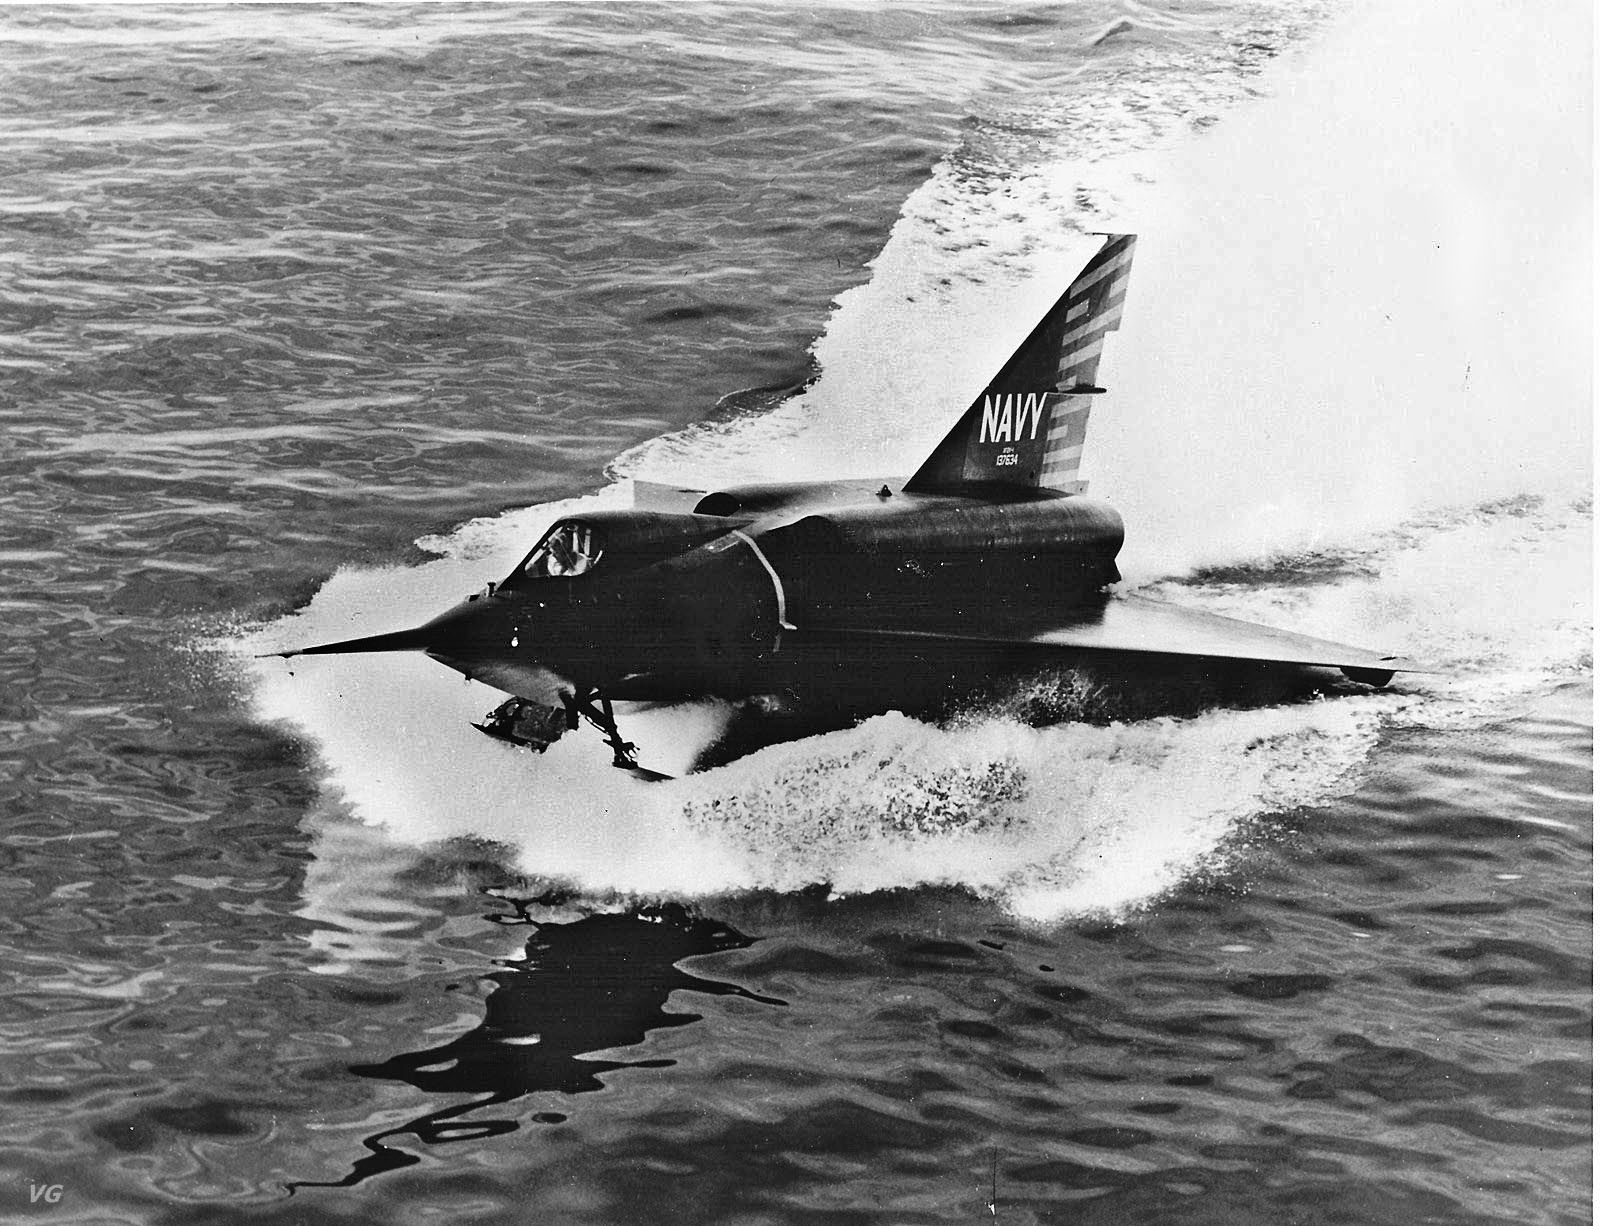 The Convair XF2Y-1 Sea Dart takes off in the water on retractable skis. During its first public demonstration the plane disintegrated in mid-air, killing the pilot. 